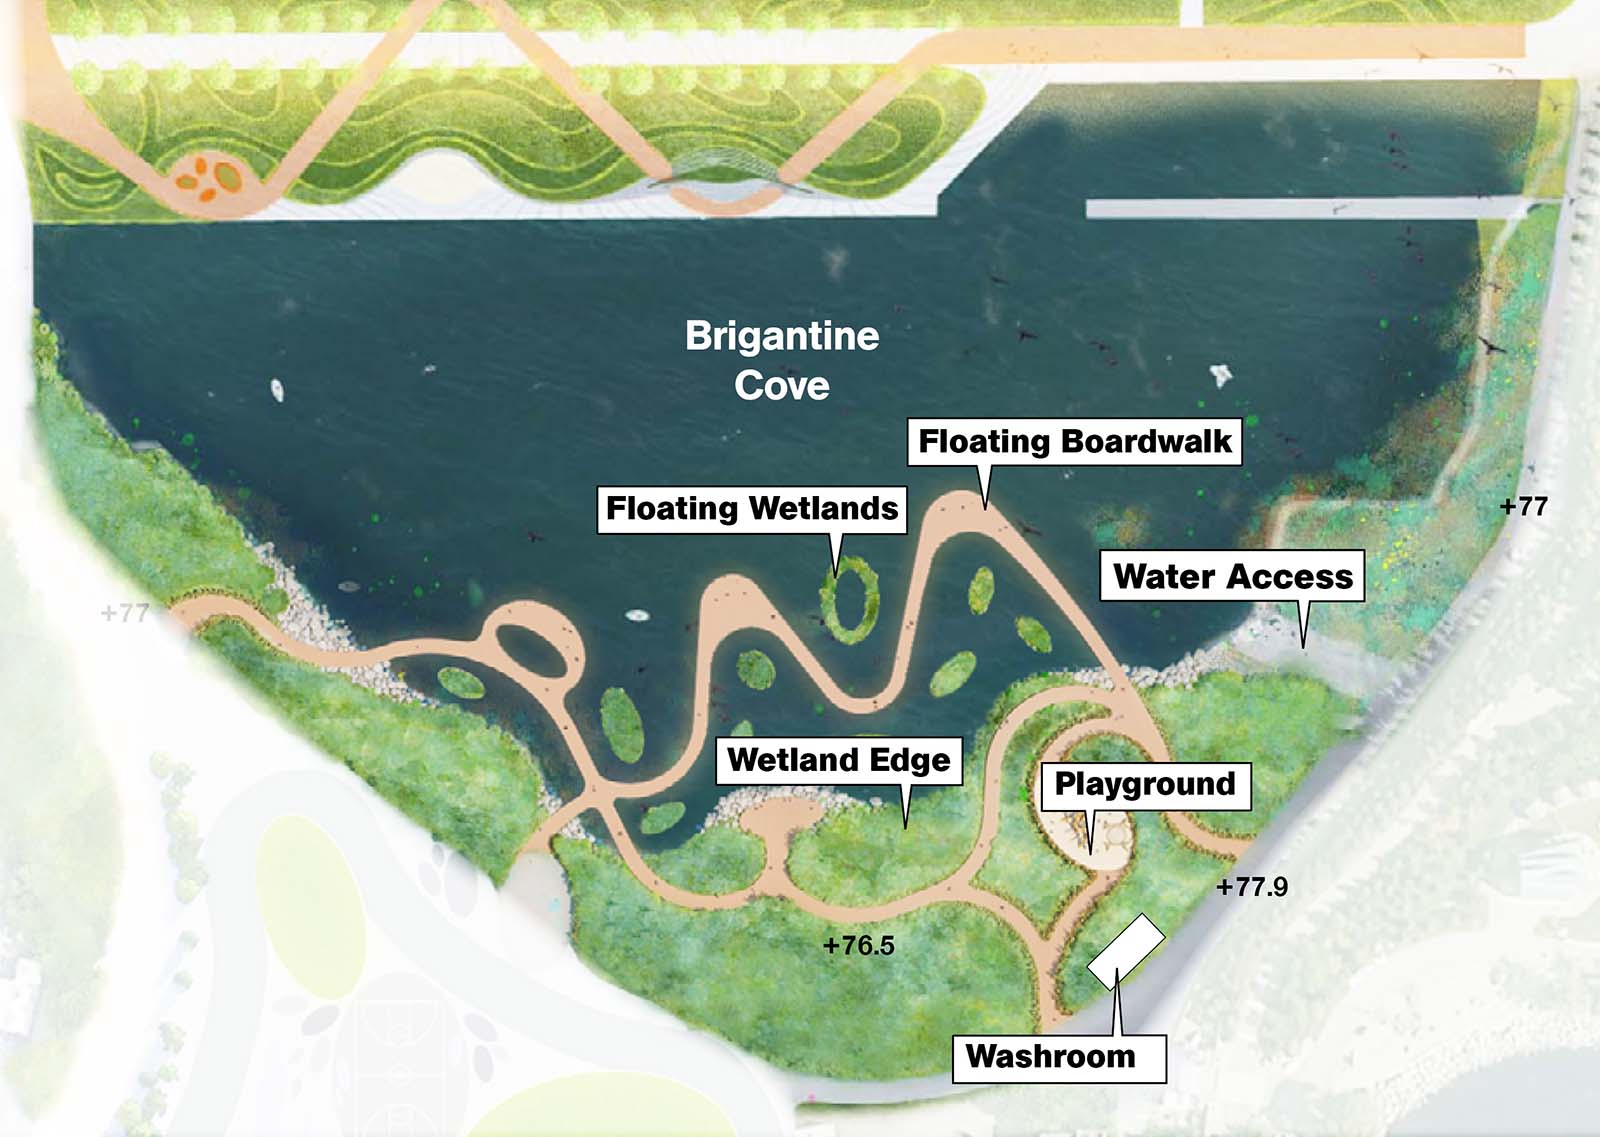 Rendered image of brigantine cove showing floating boardwalks and floating wetlands over the water. A wetland edge is shown and water access is to the east, with an inland playground and washrooms